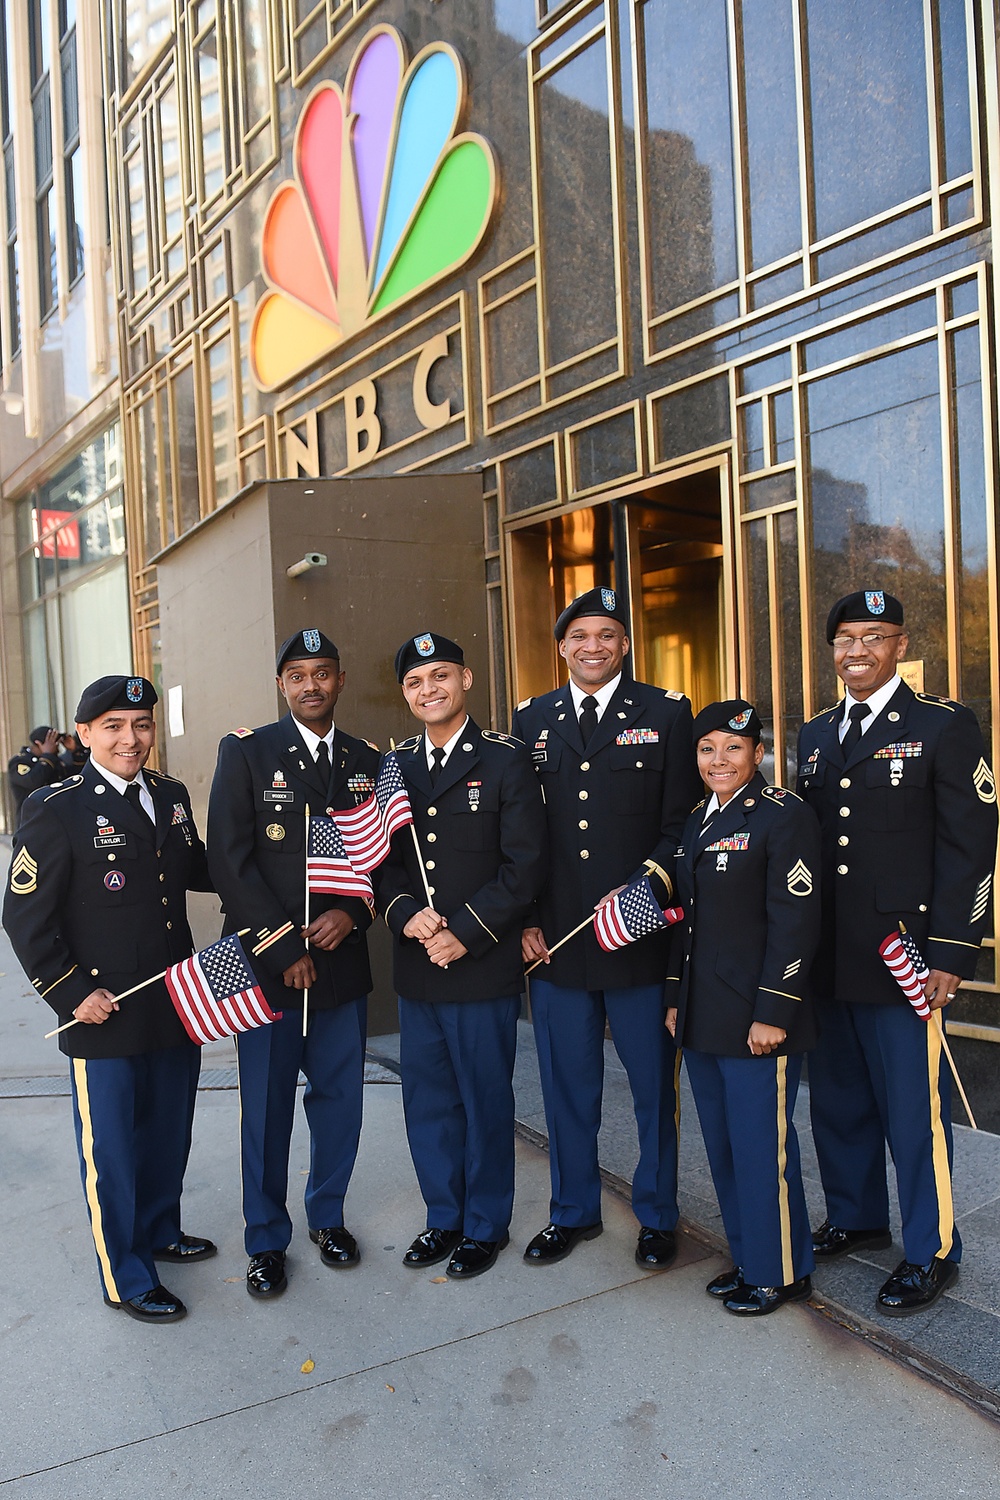 Chicago-based Army Reserve soldiers are recognized during daytime television Steve Harvey show